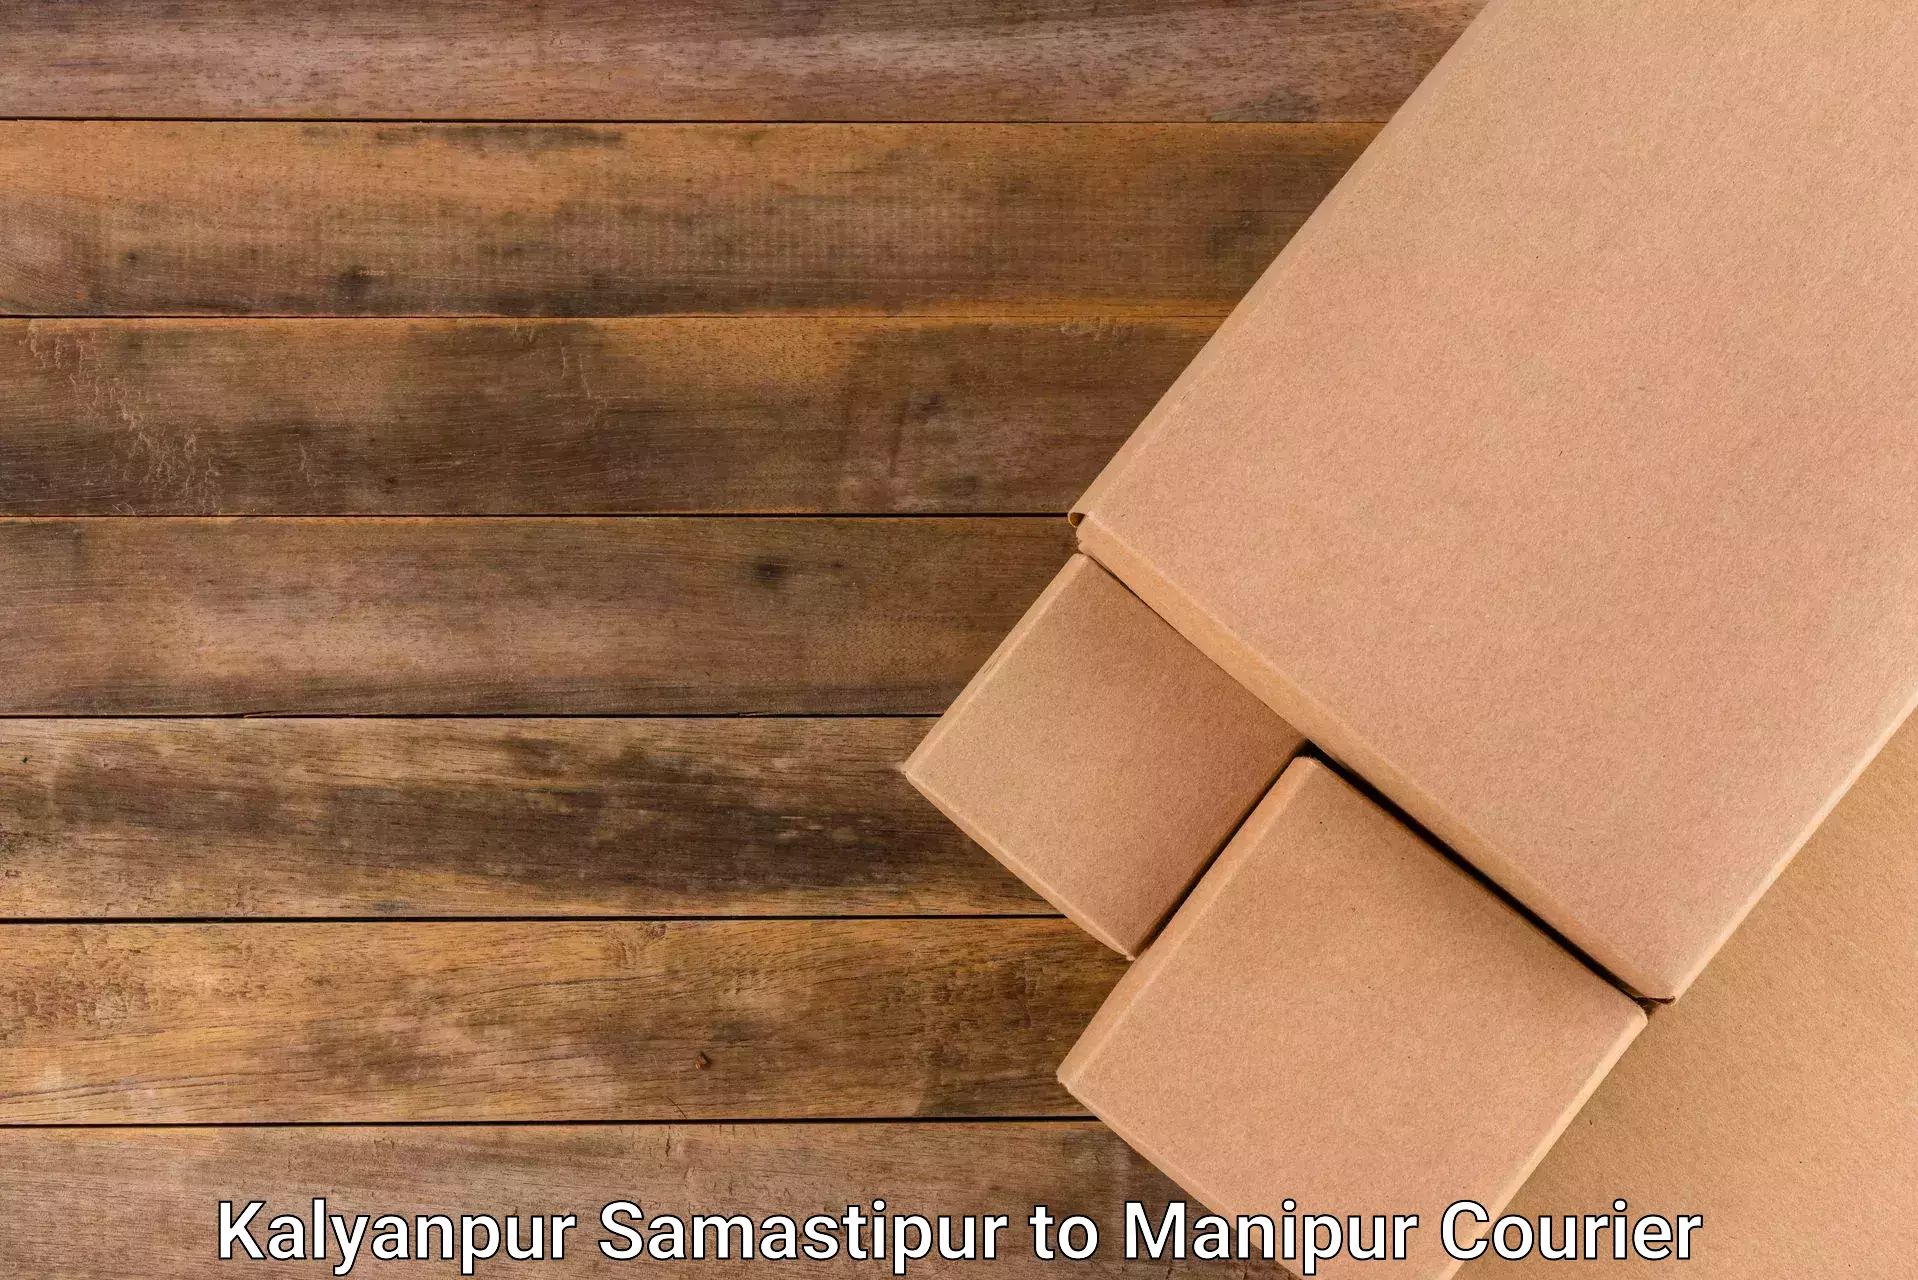 Ocean freight courier Kalyanpur Samastipur to Tamenglong